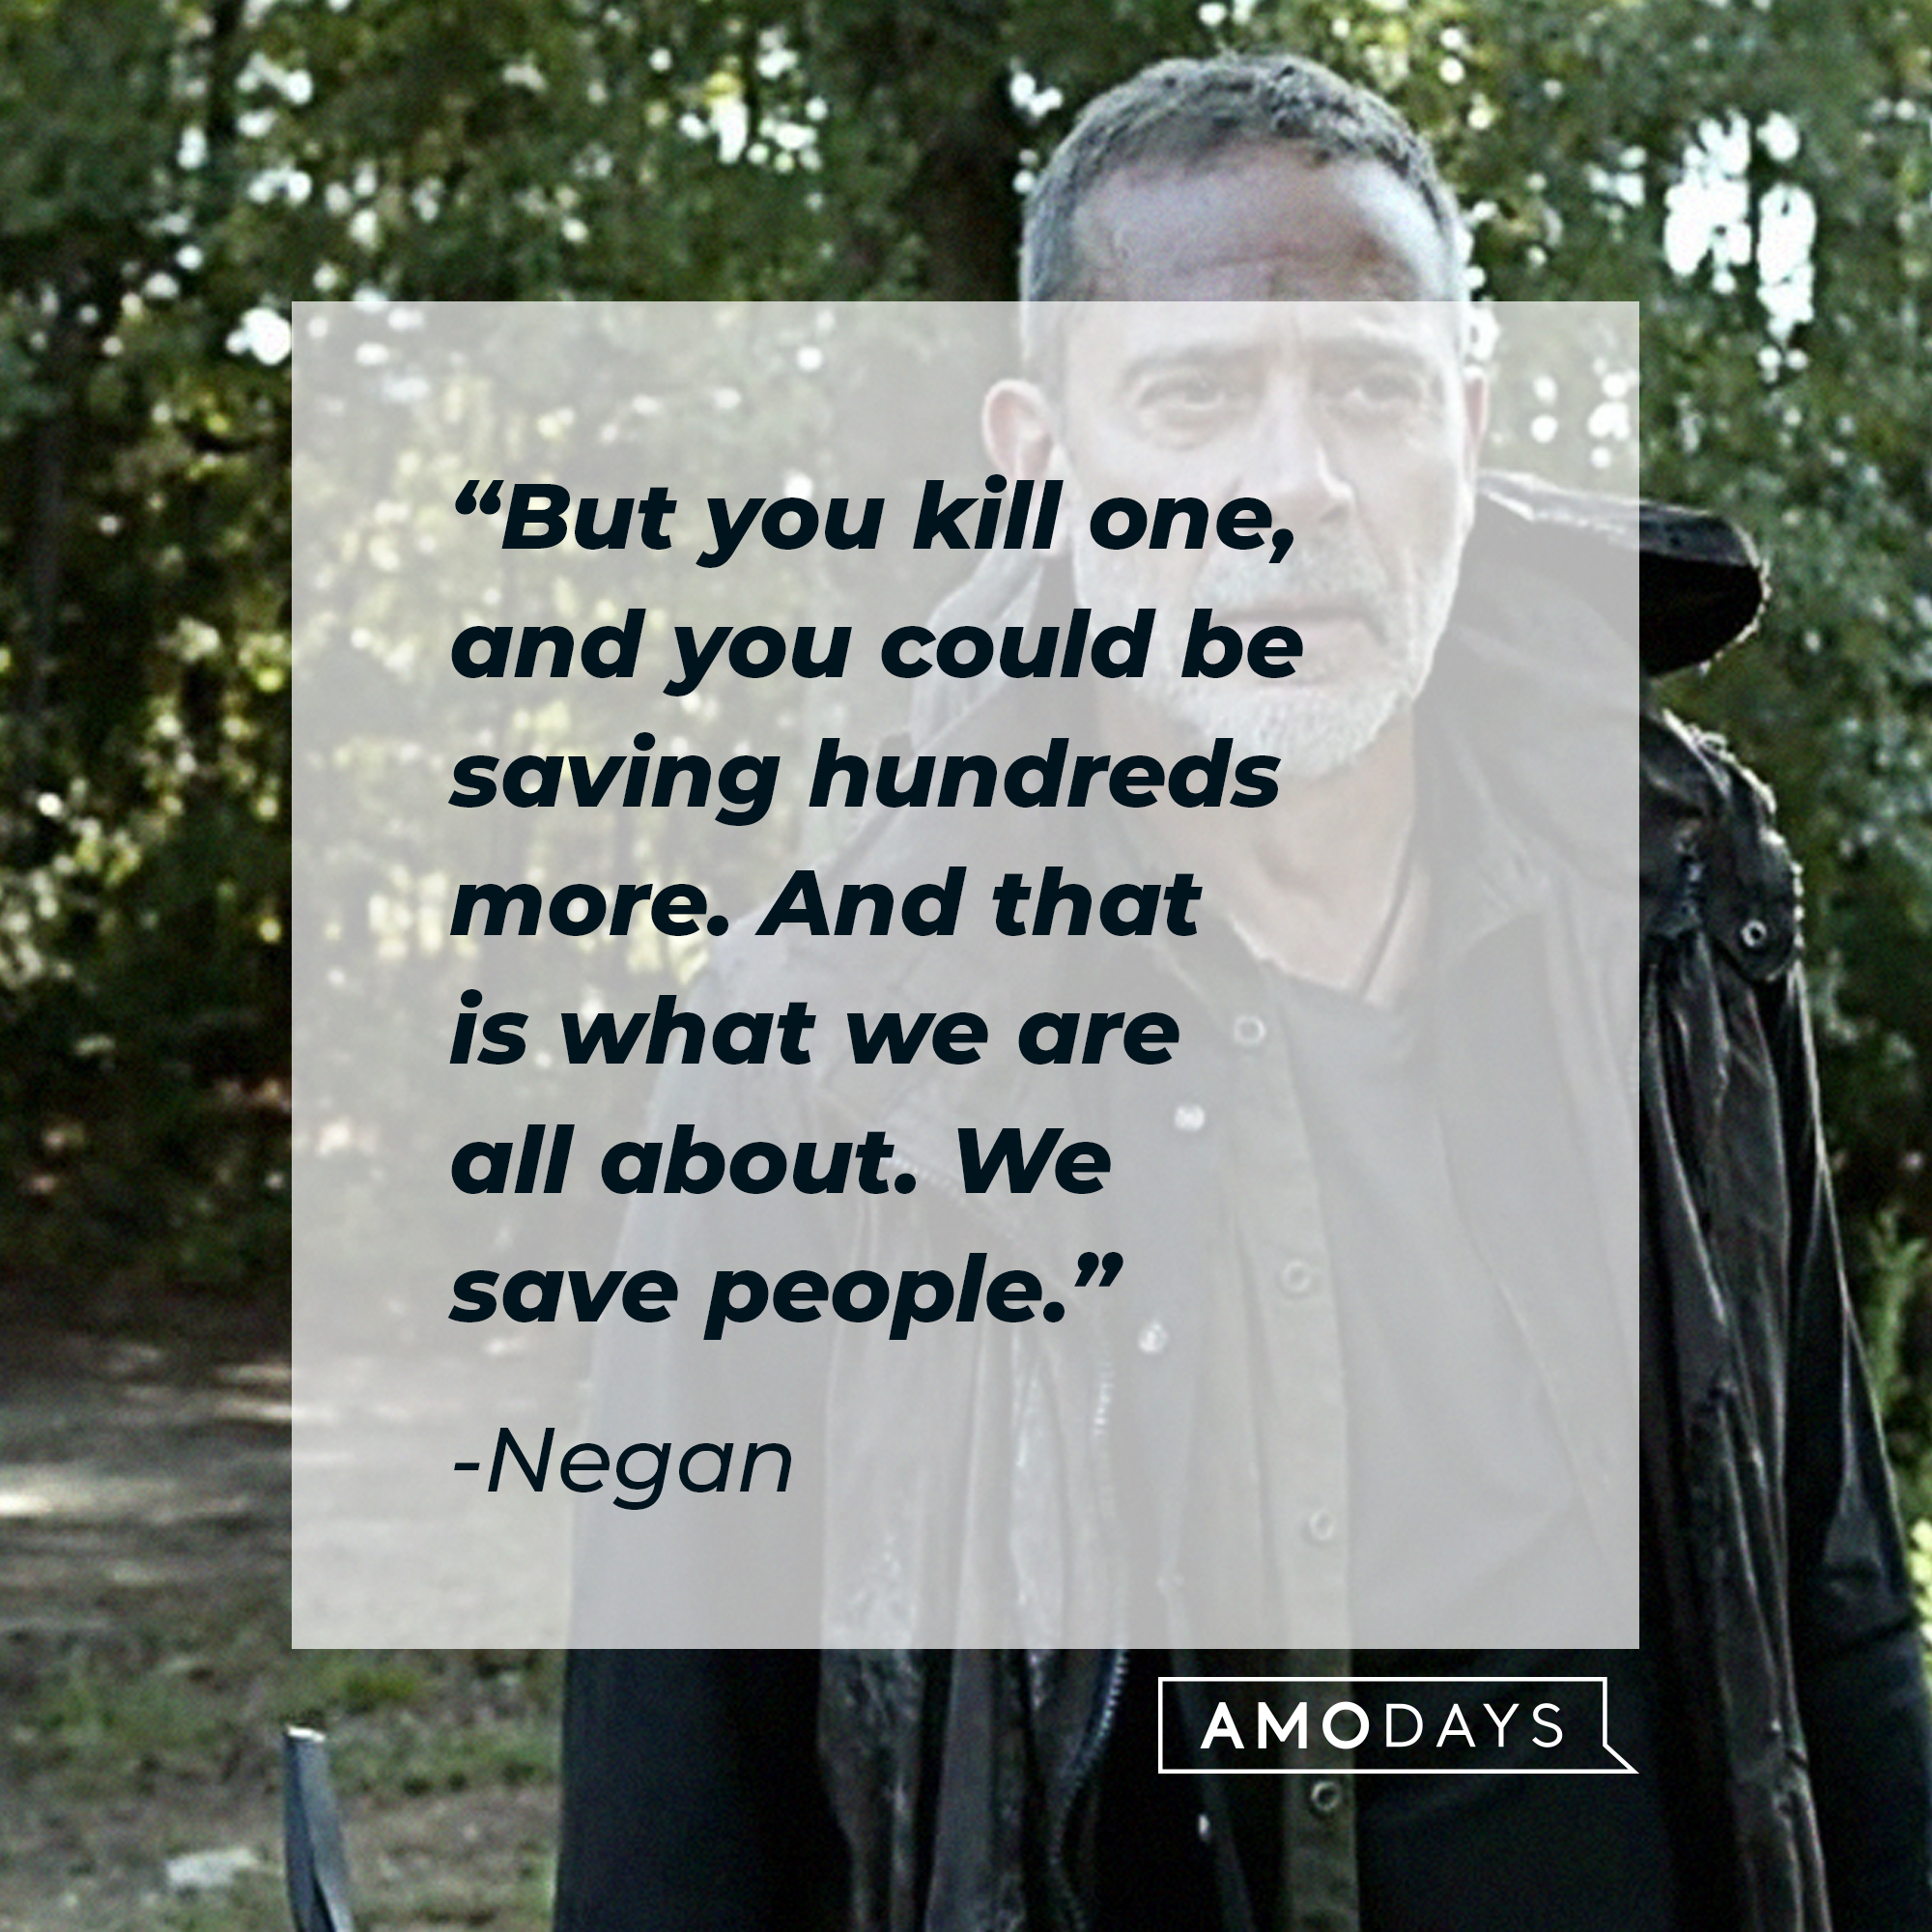 Negan's quote: "But you kill one, and you could be saving hundreds more. And that is what we are all about. We save people." | Source: Facebook/TheWalkingDeadAMC